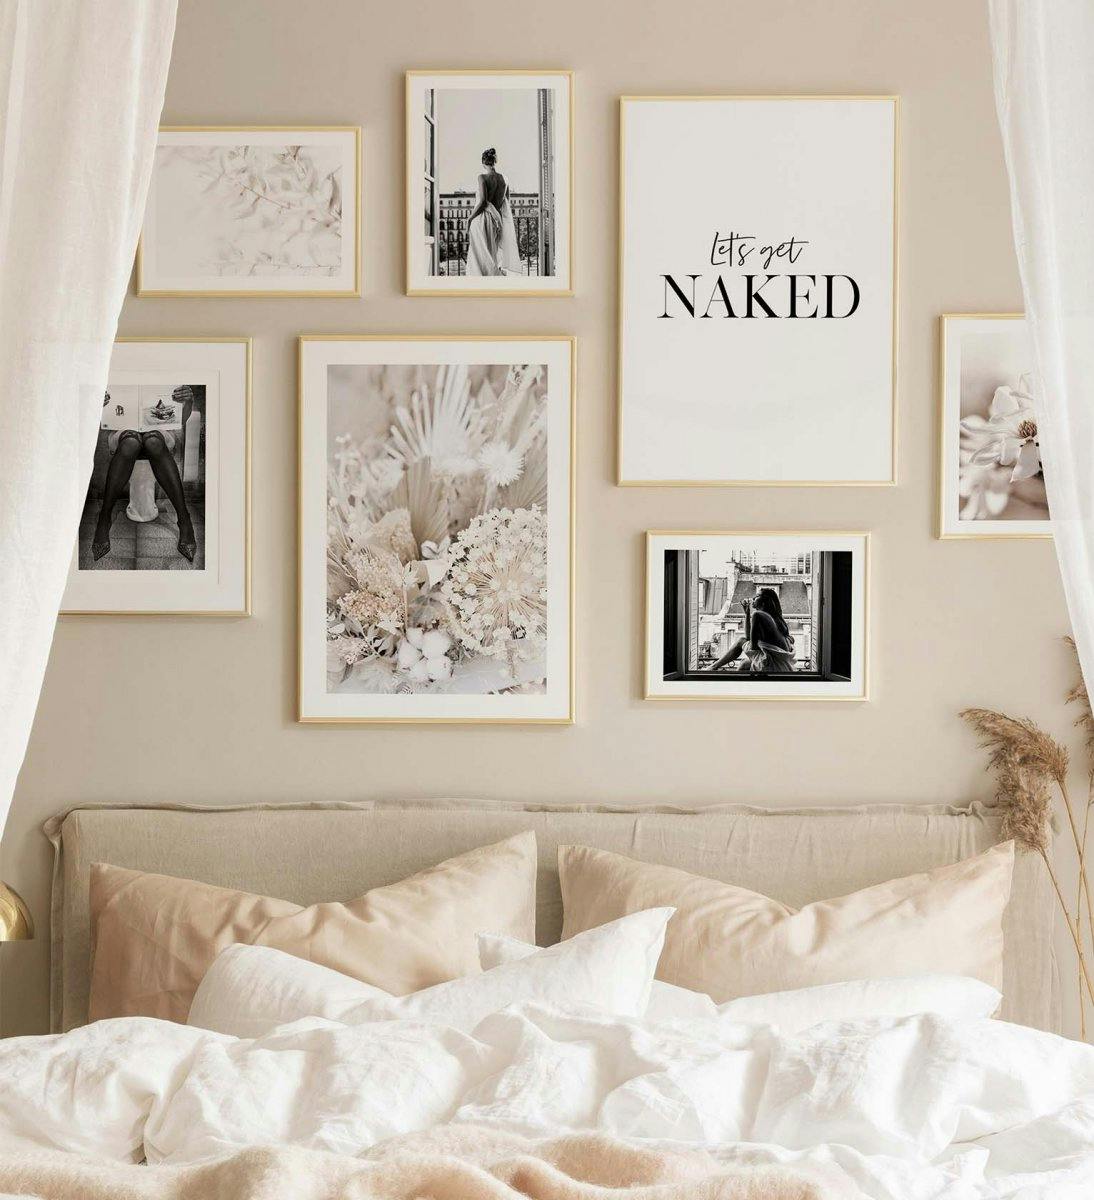 Monochrome art prints combined with beige colours make a trendy gallery wall for the bedroom